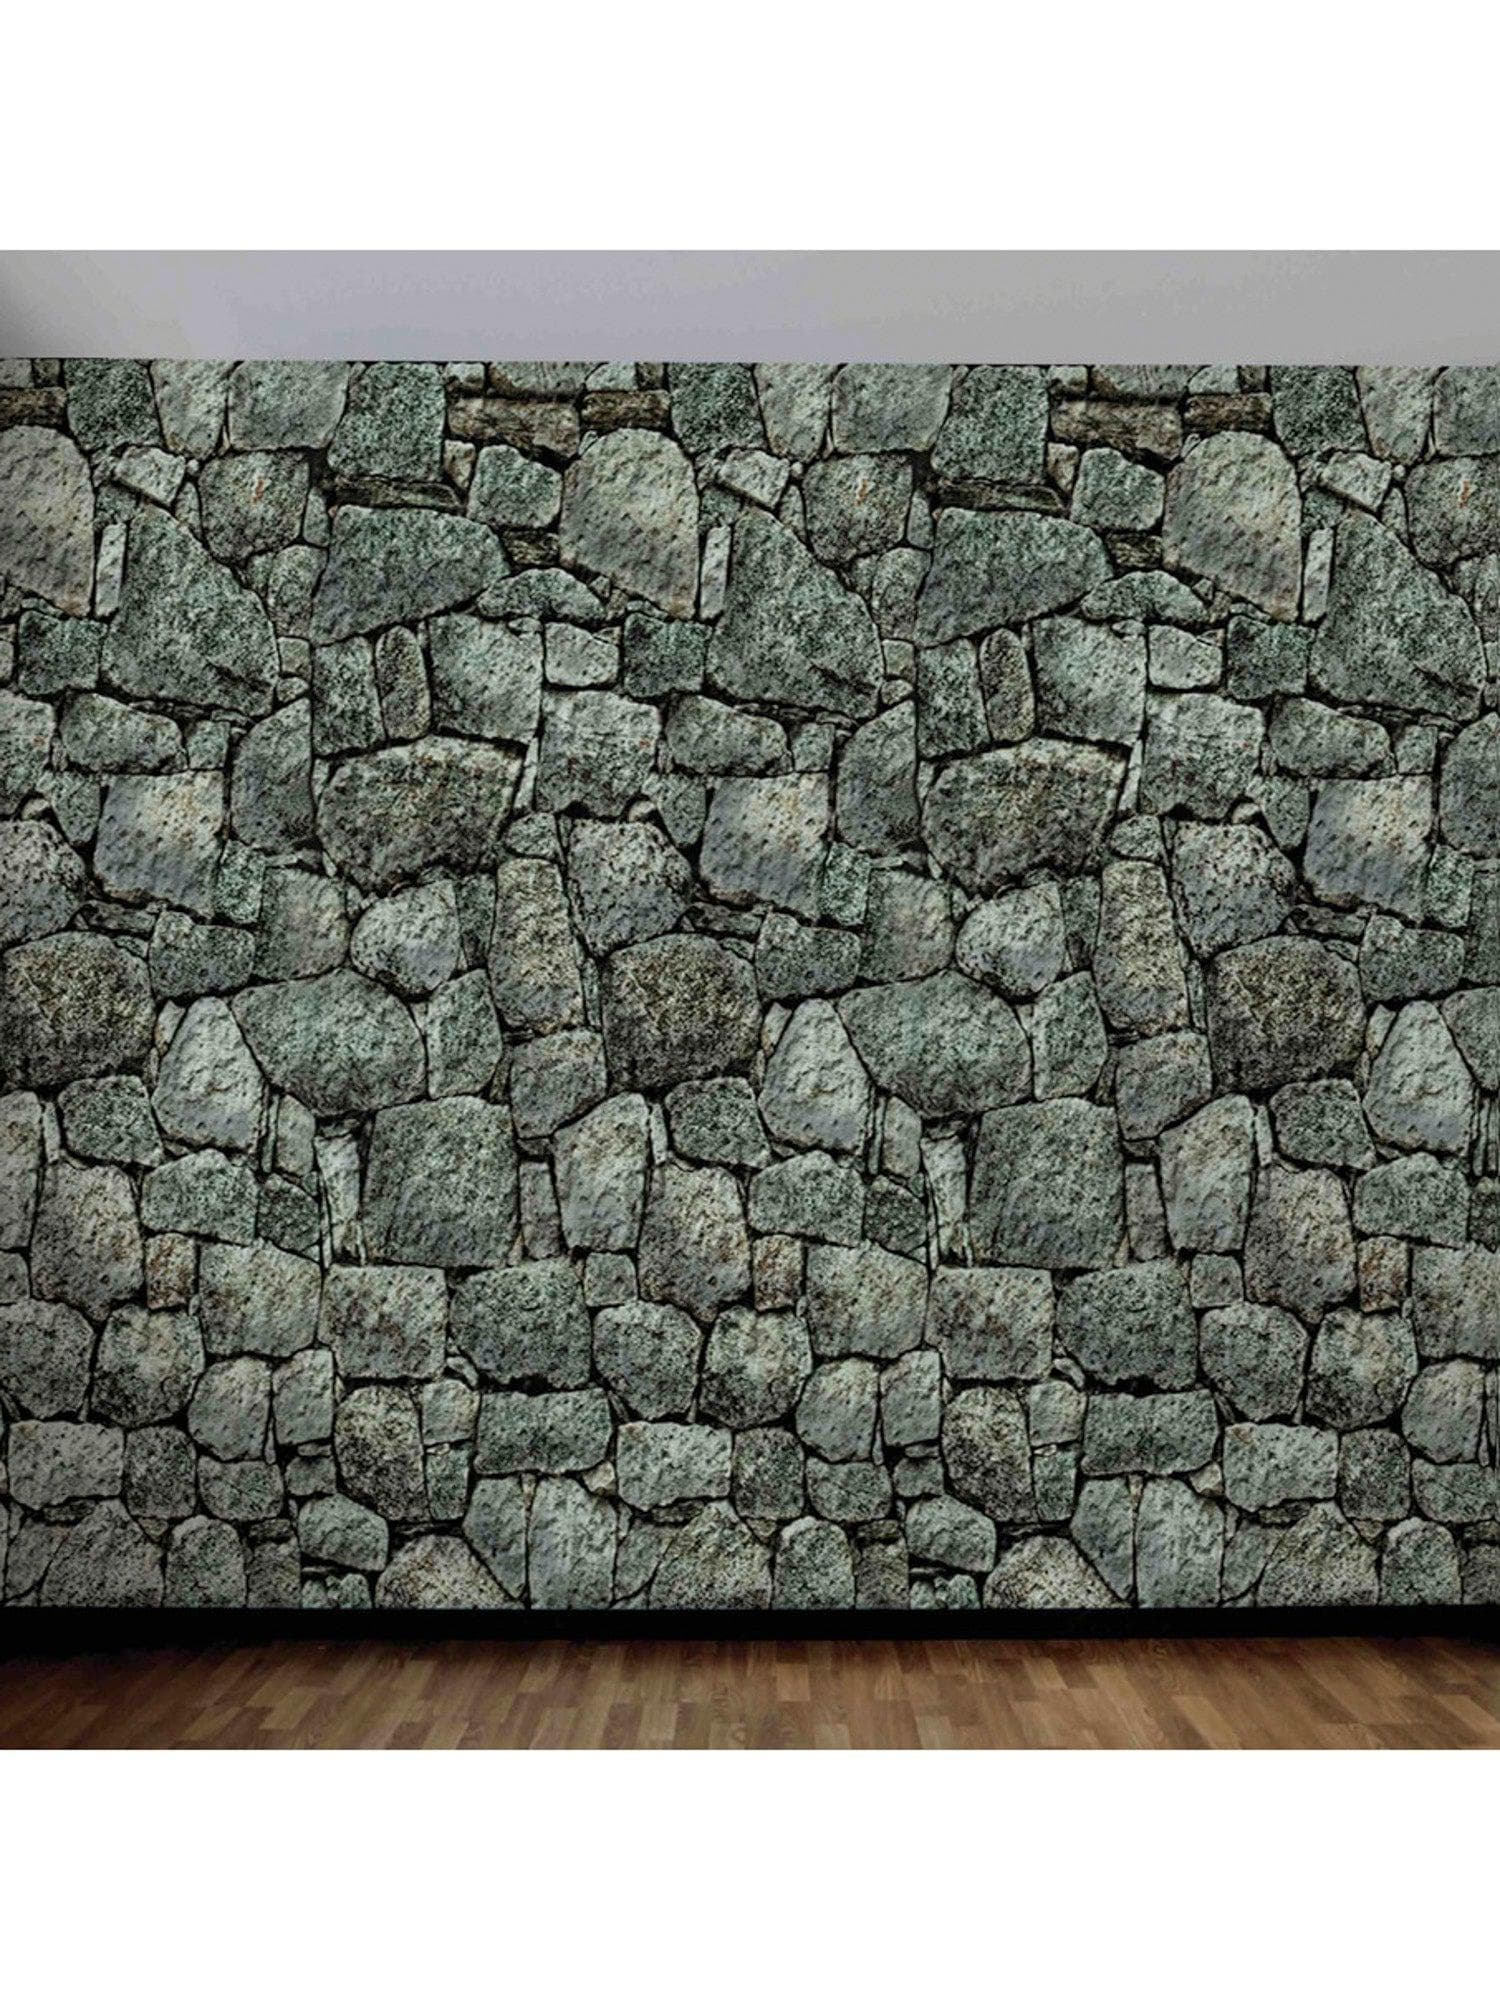 20 Foot Indoor and Outdoor Dungeon Stone Wall Backdrop - costumes.com